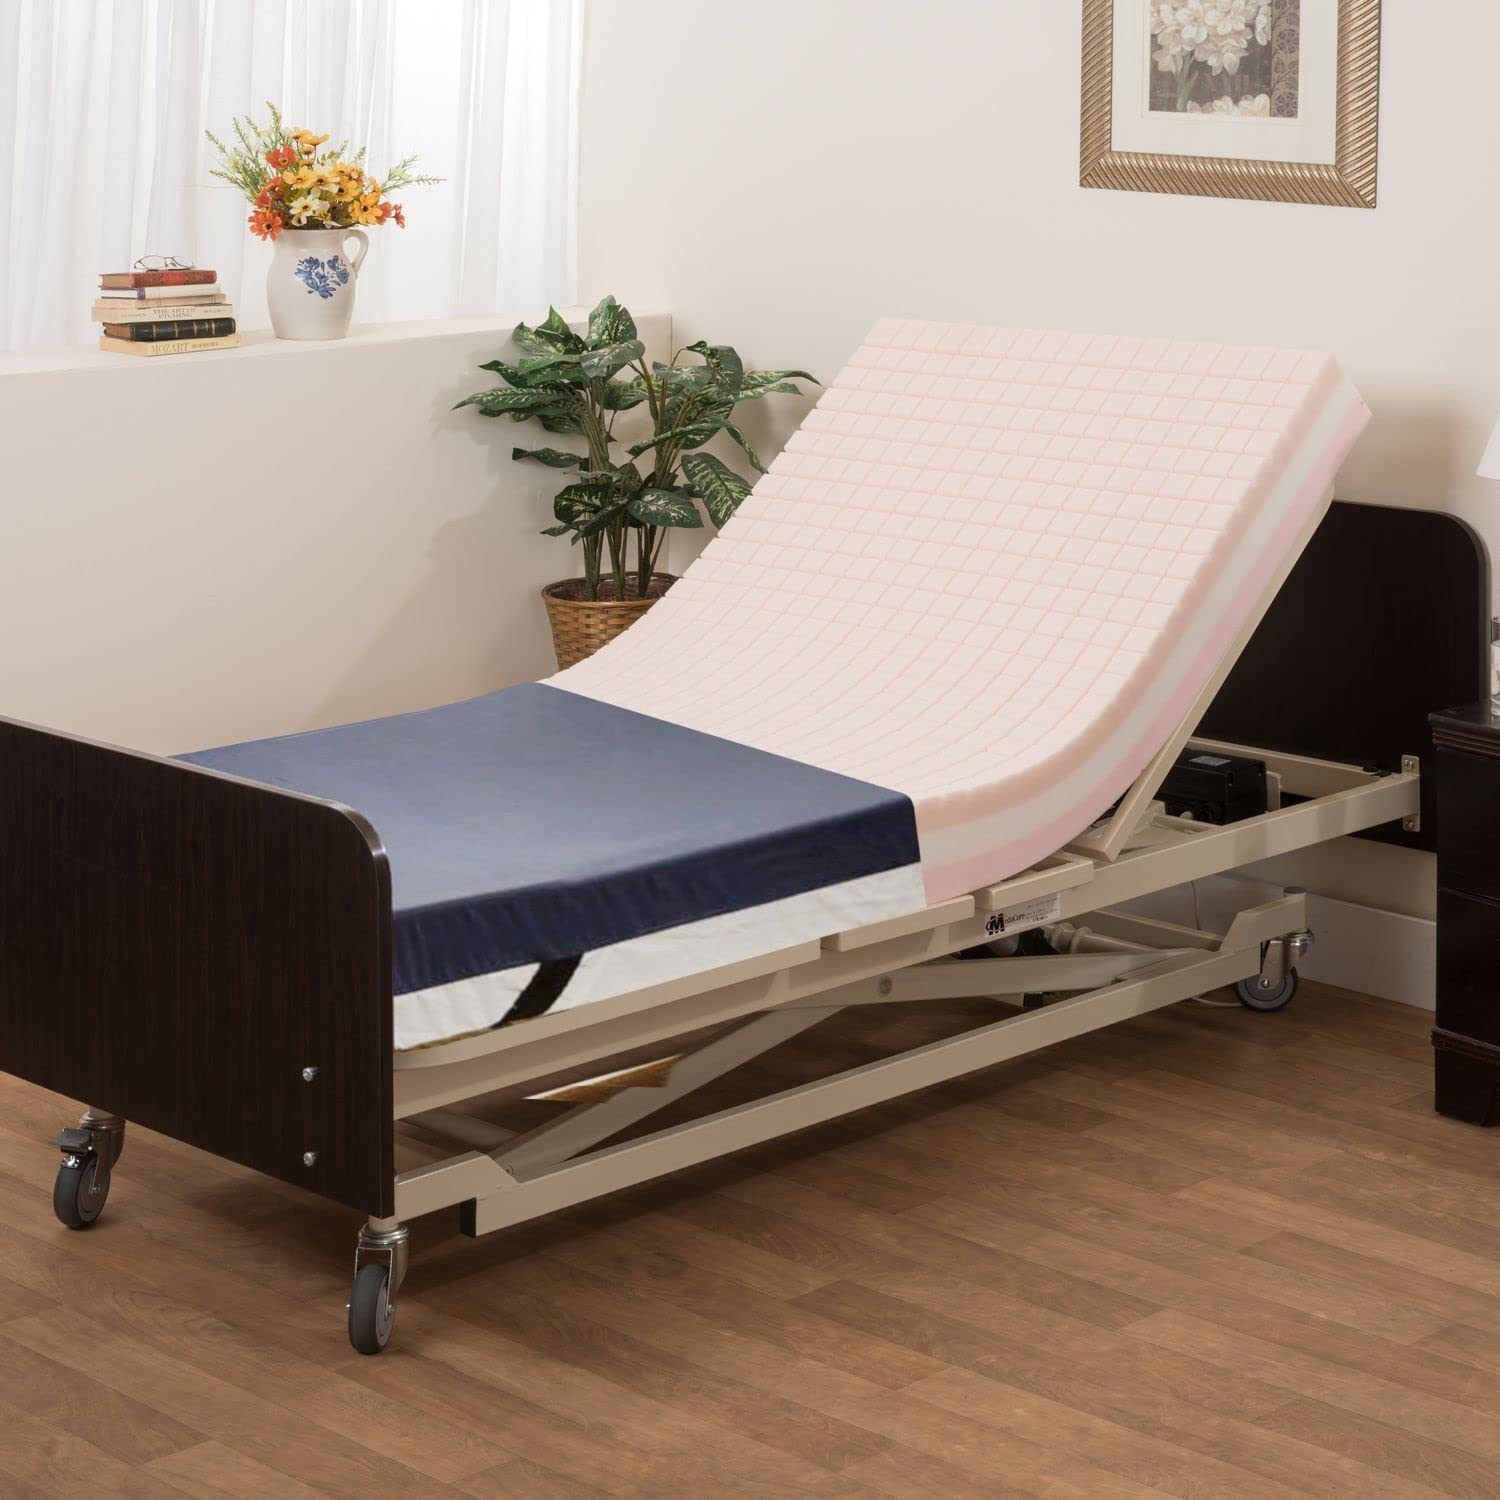 Where To Buy Hospital Bed Mattresses